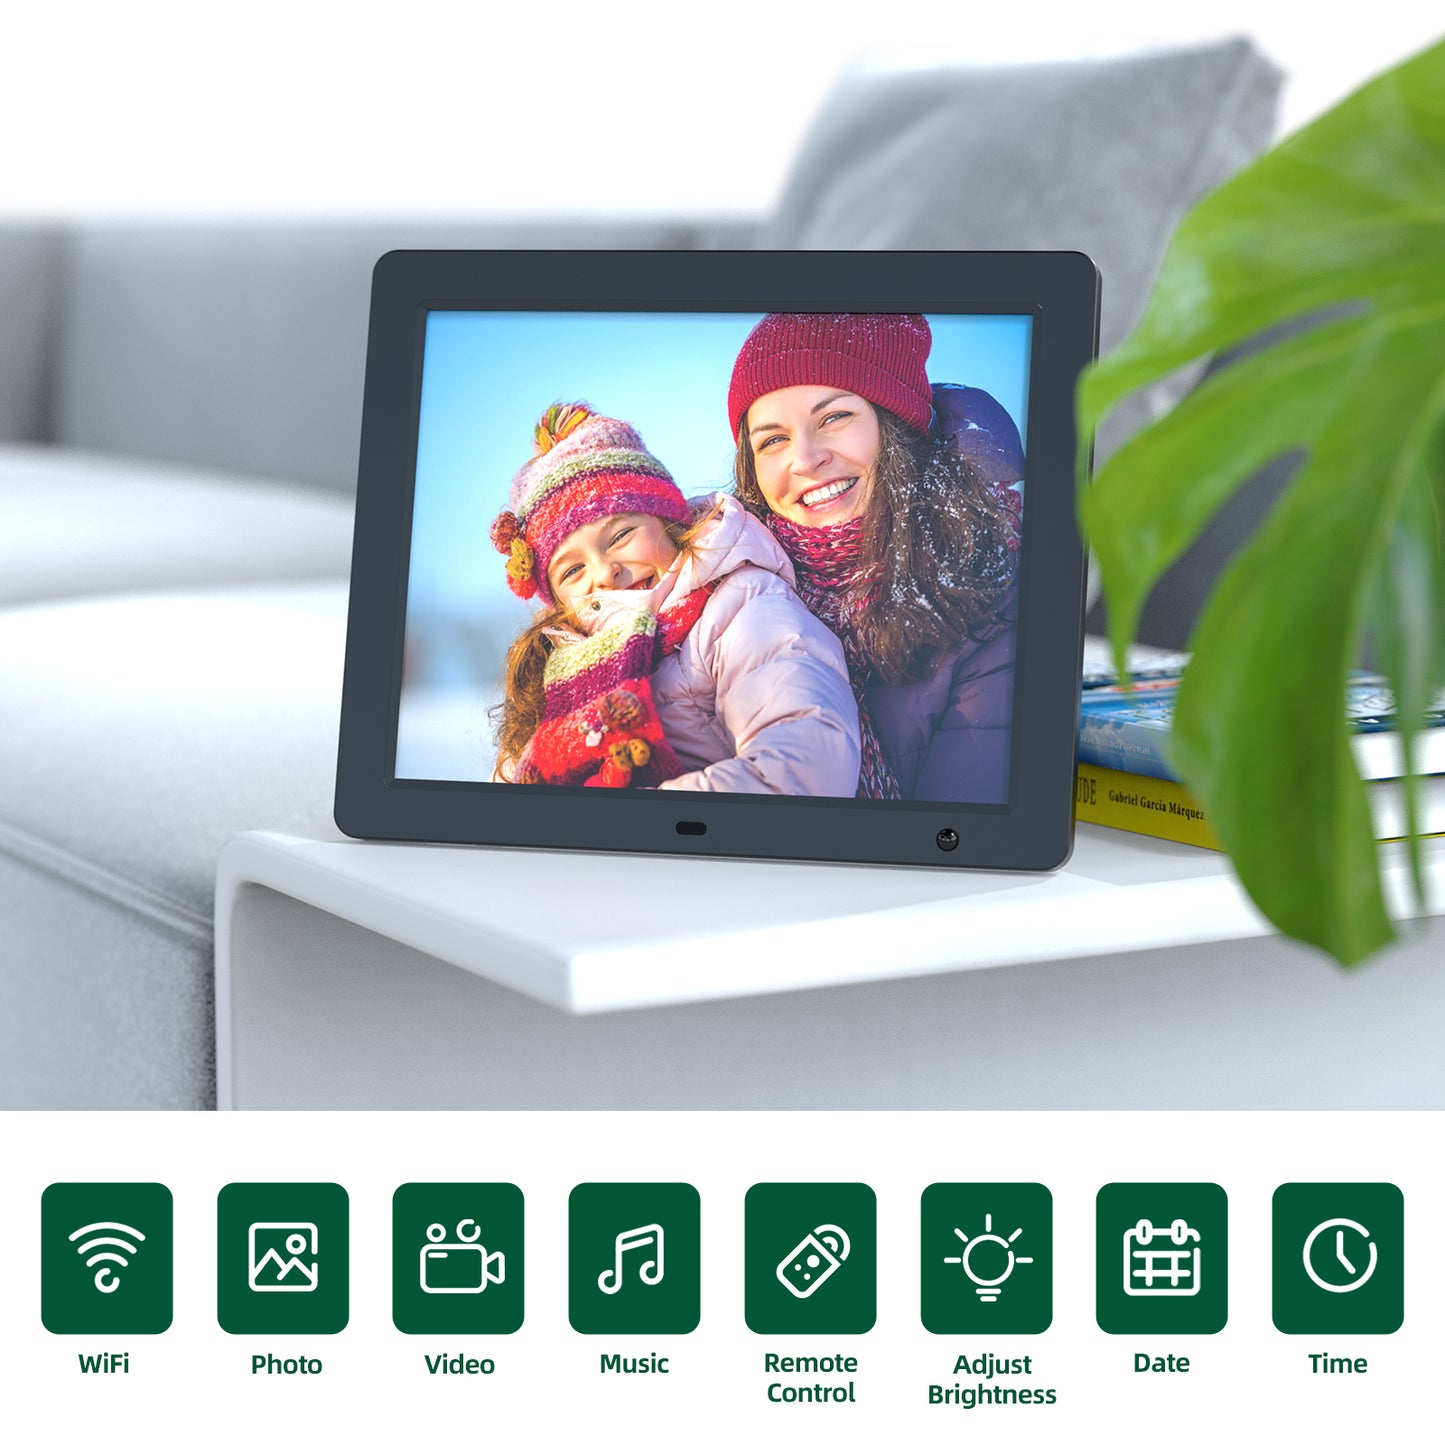 JEEMAK WiFi Digital Picture Frame 15" IPS Screen Smart Cloud Picture Frame Auto-Rotate remote control Share Photos Videos via App & Email from Anywhere, Motion Sensor, USB & SD Slot, Auto-Rotate